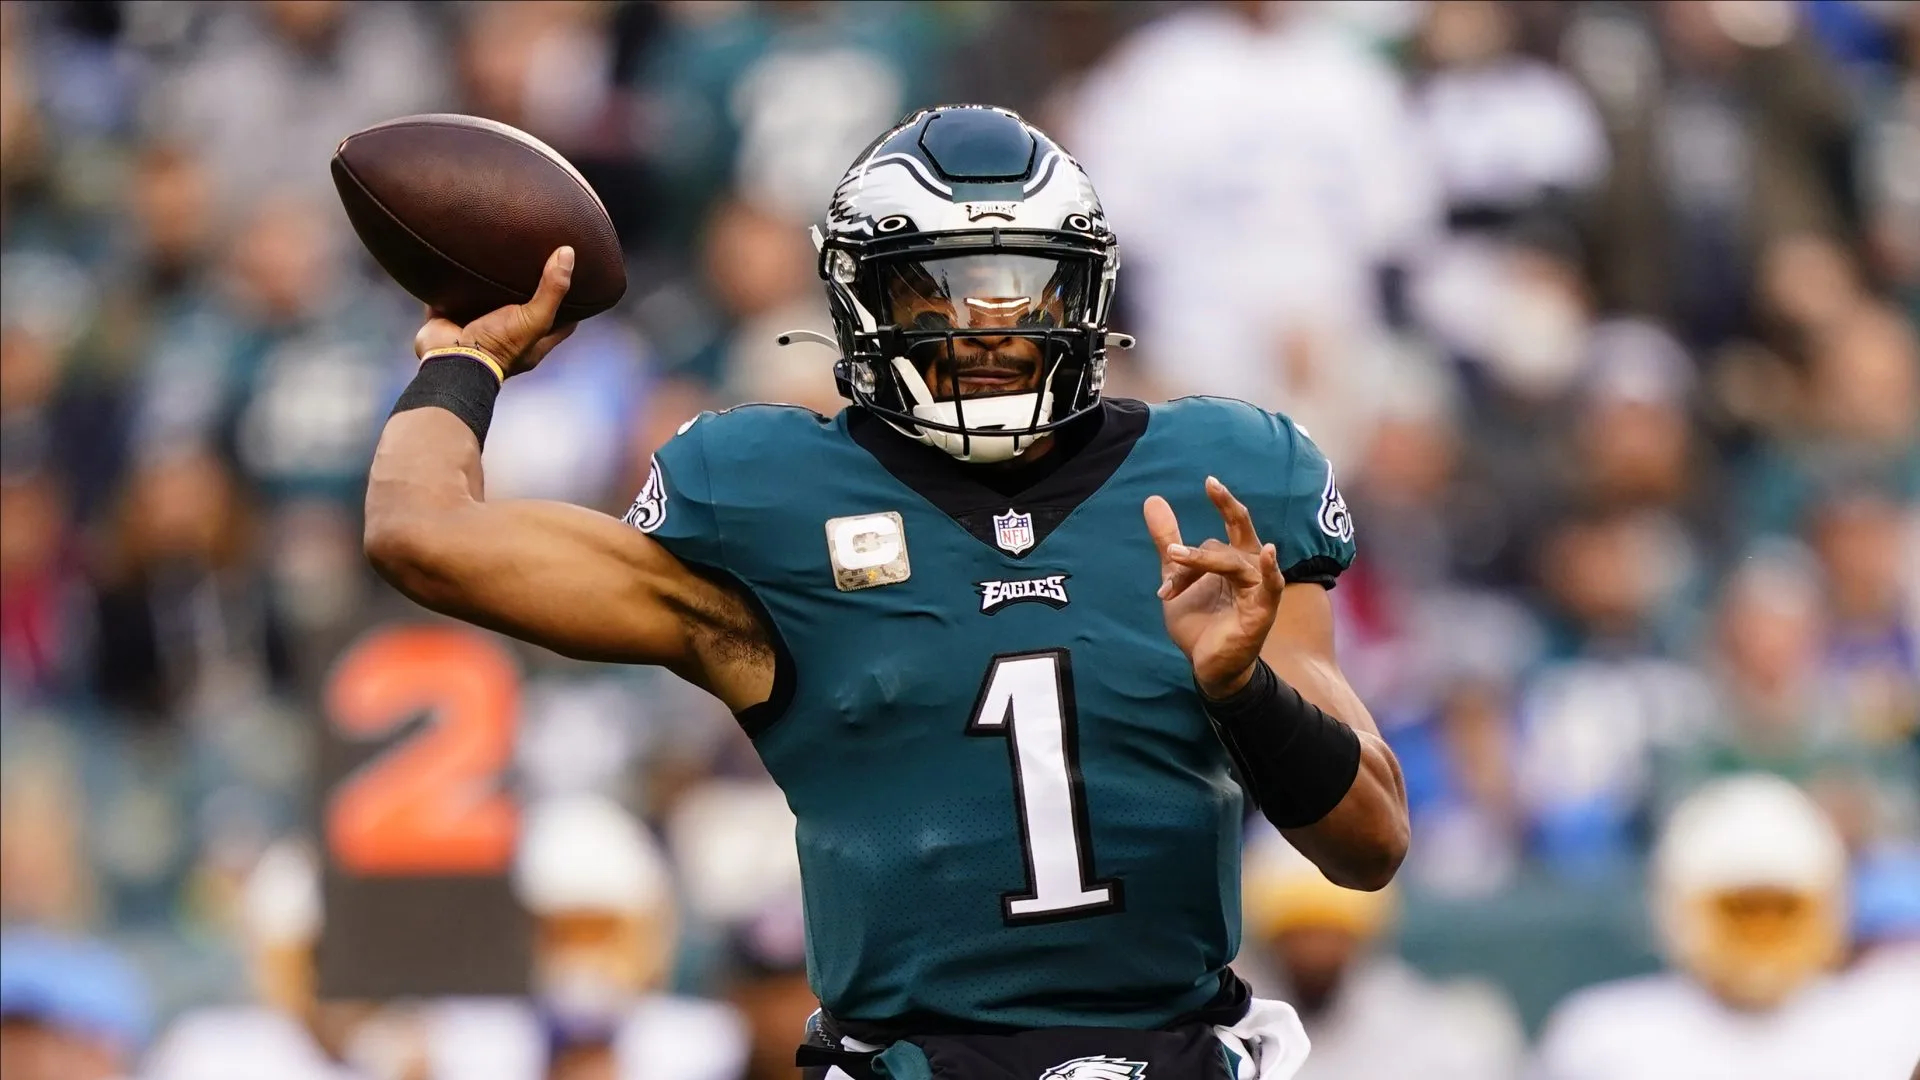 1920x1080 Eagles have more questions than answers 9 games into season | ABC27